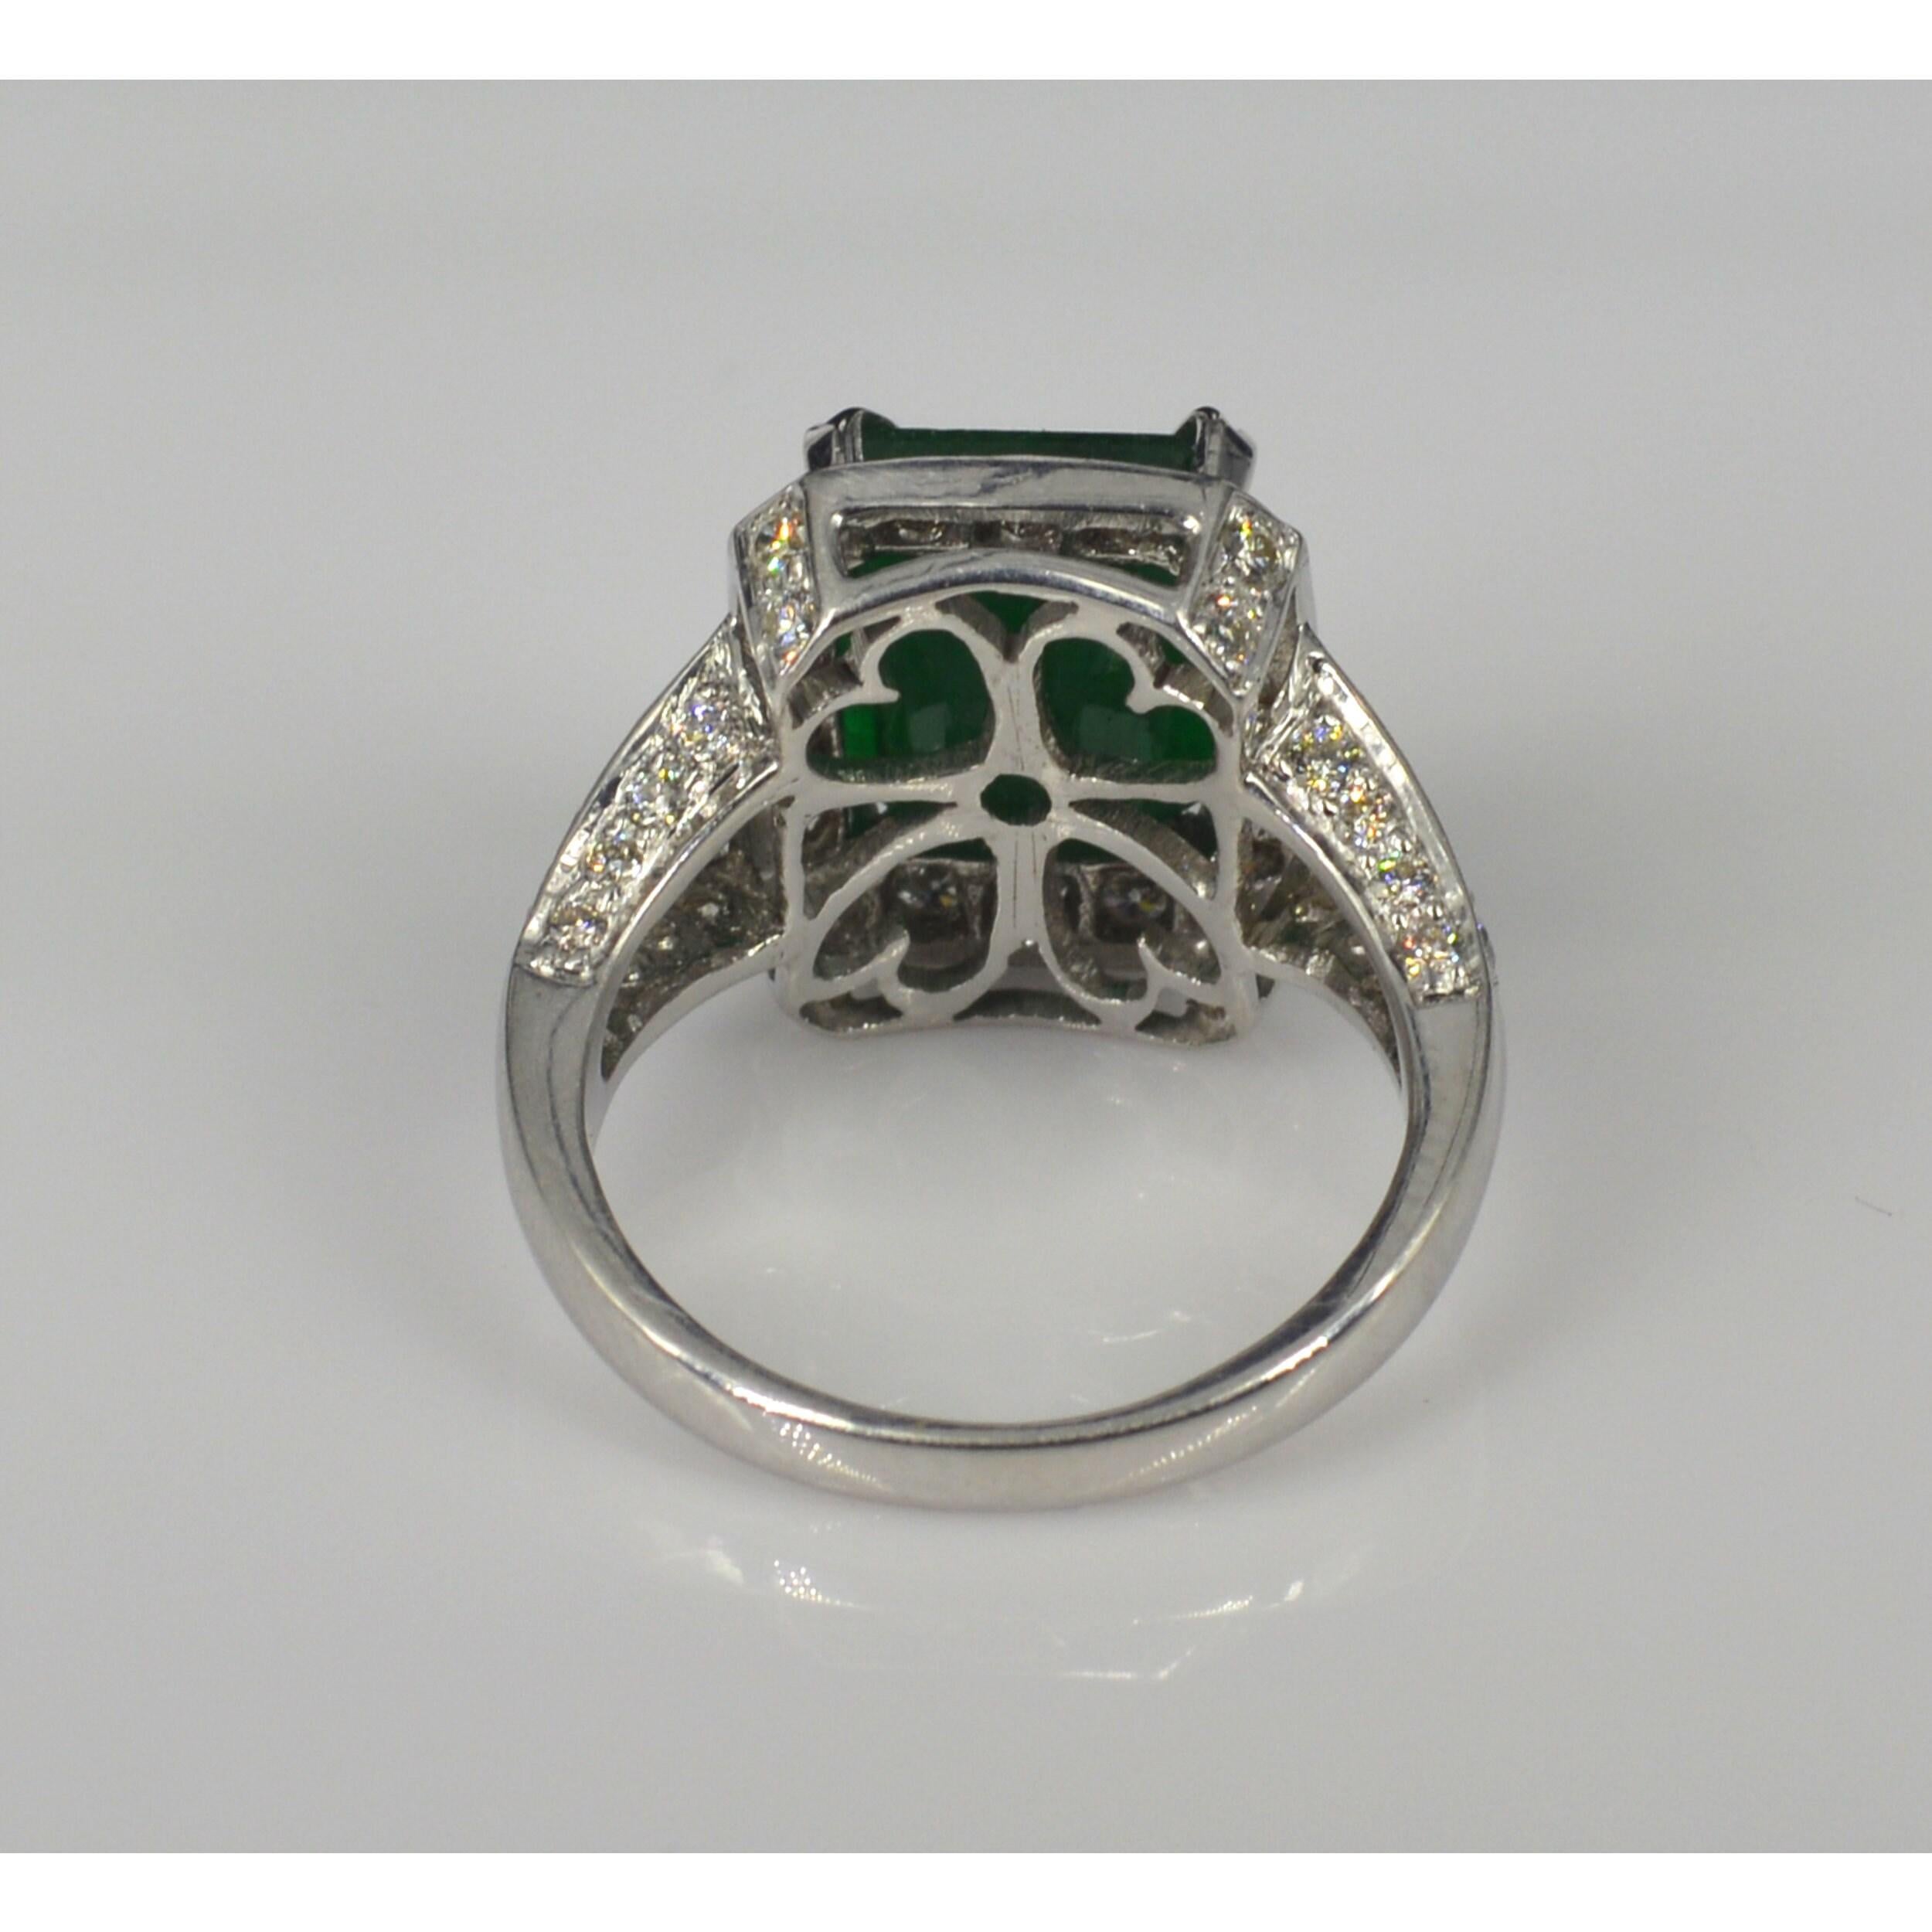 For Sale:  5 Carat Emerald Diamond Engagement Ring, Emerald Statement Ring 3